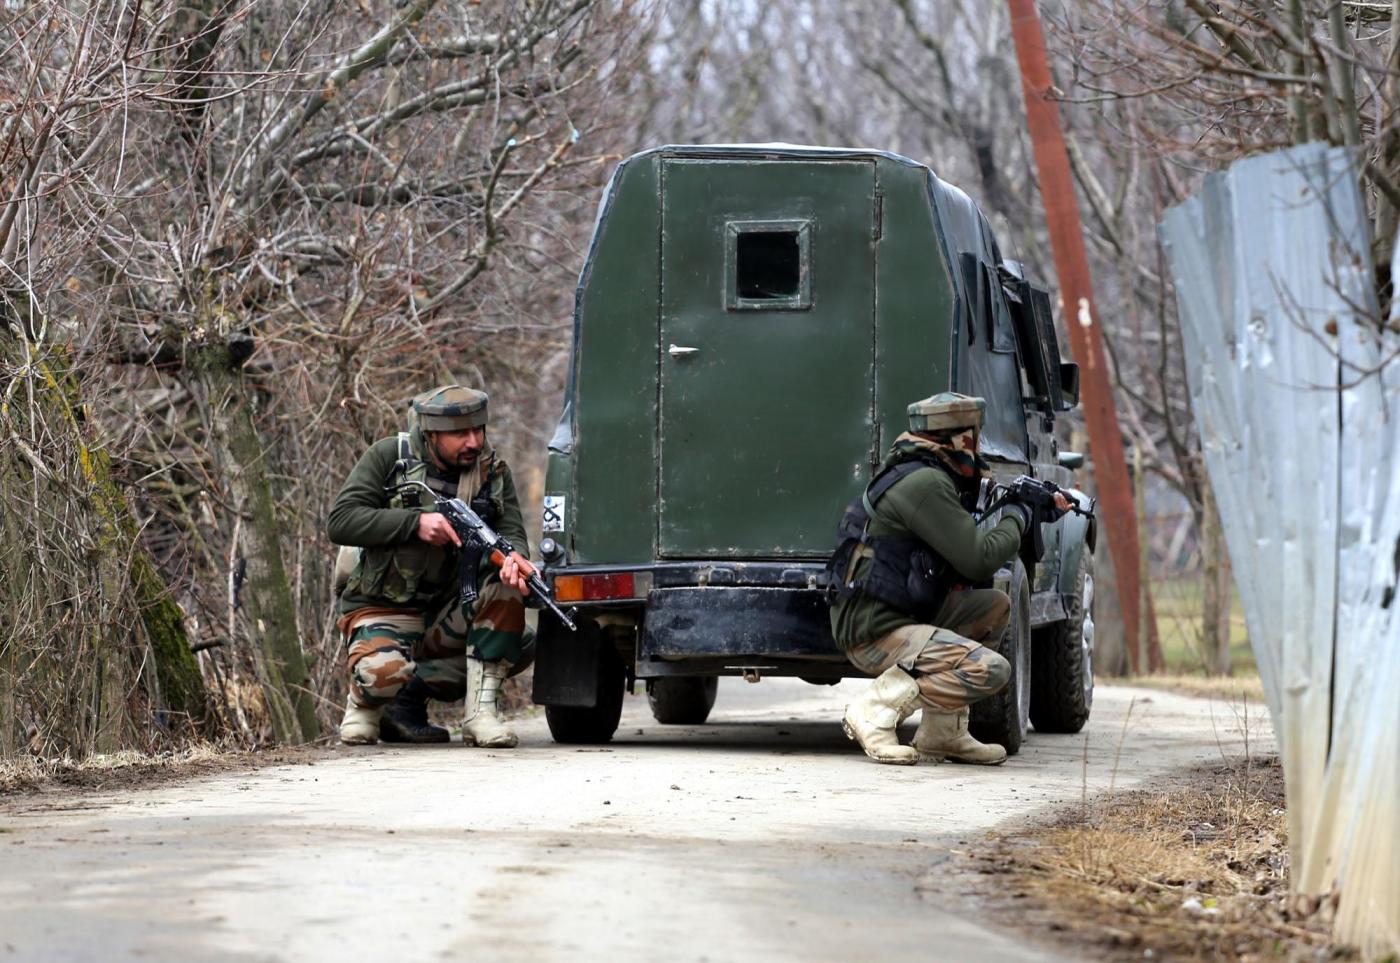 Sopore: Soldiers take position during a gun-battle with militants at Rehmatabad village in Jammu and Kashmir's Sopore district on Feb 21, 2015. Two foreign guerrillas belonging to the Lashkar-e-Taiba (LeT) group were killed in the encounter. (Photo: IANS) by . 